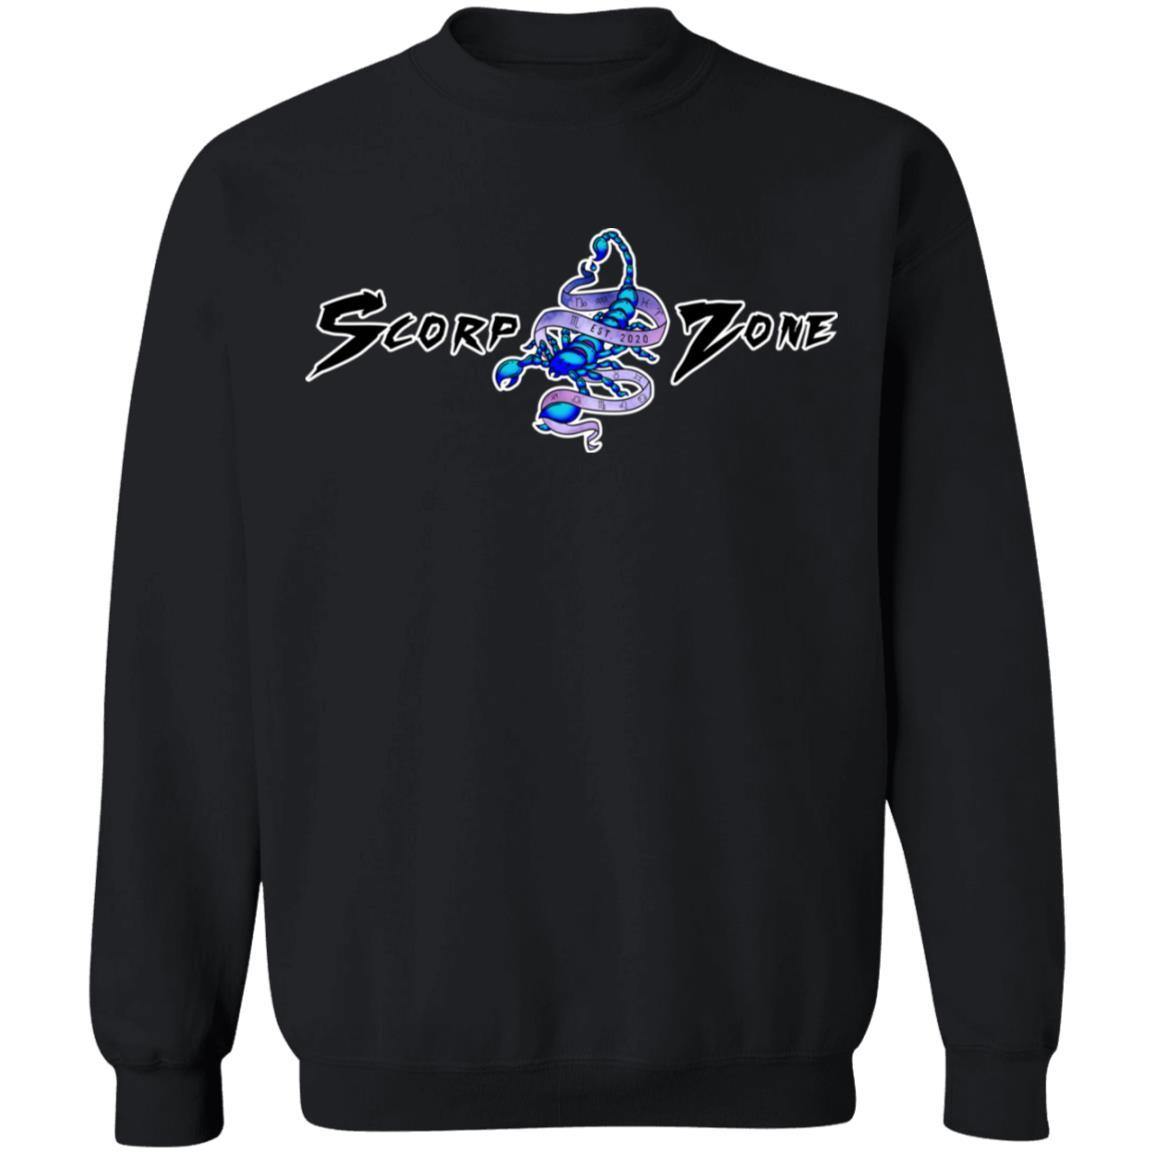 999 ANGEL NUMBER - COMPLETION - DESIGN ON BACK - SCORP ZONE LOGO ON FRONT - Z65 Crewneck Pullover Sweatshirt - ScorpZone